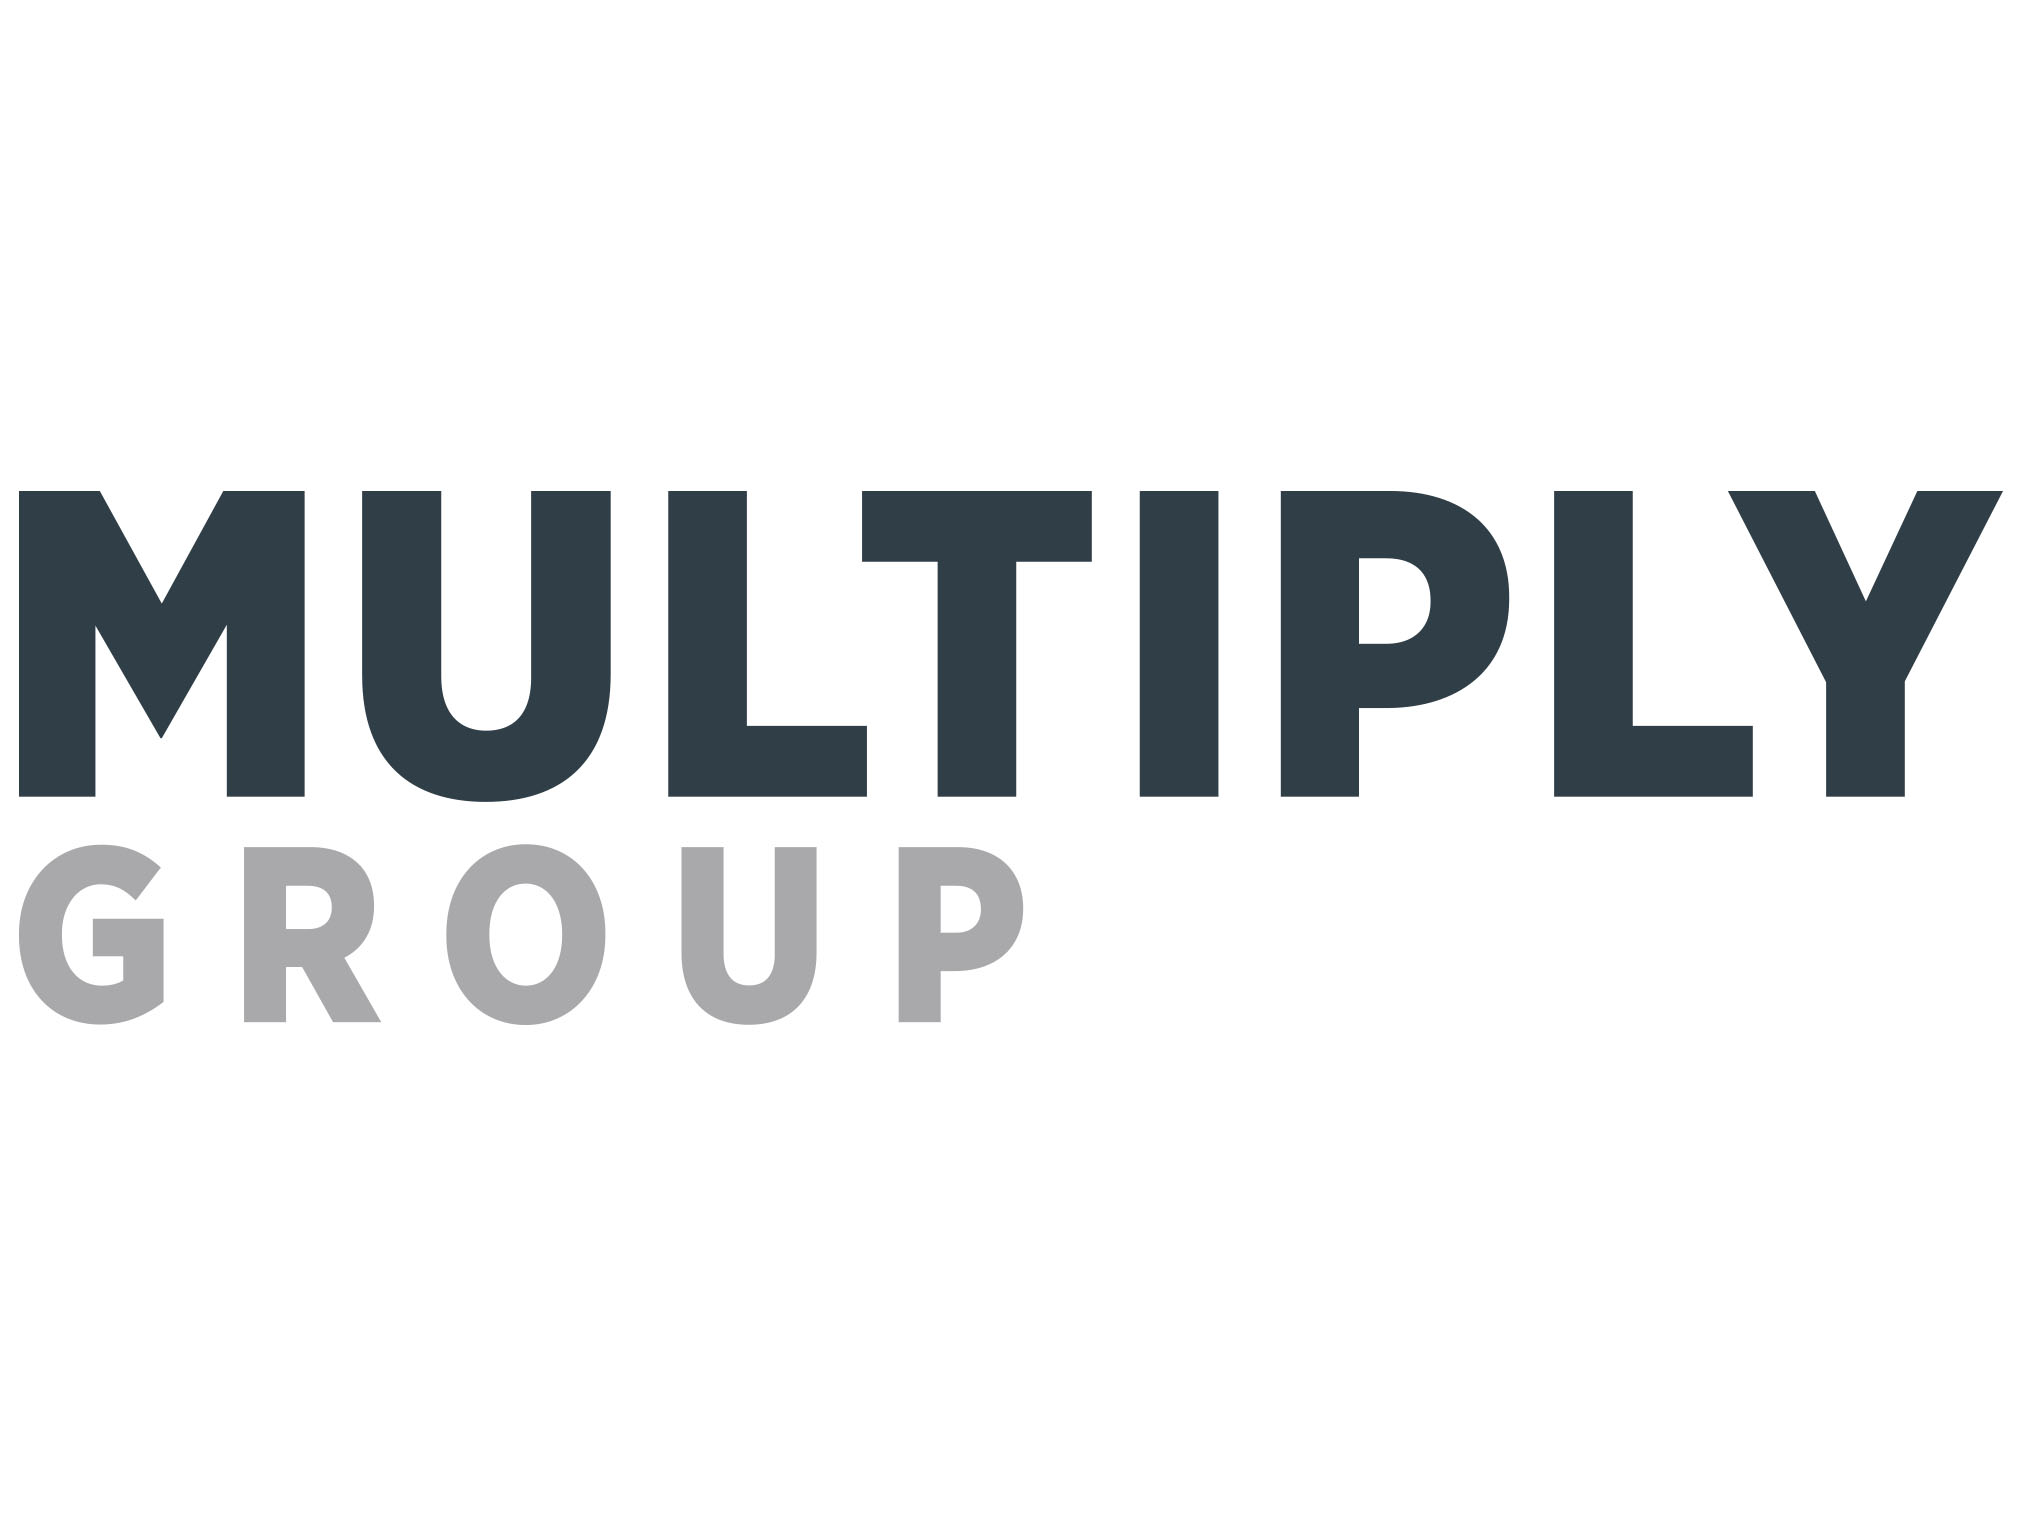 Multiply Group launches workplace wellness program to support employee wellbeing